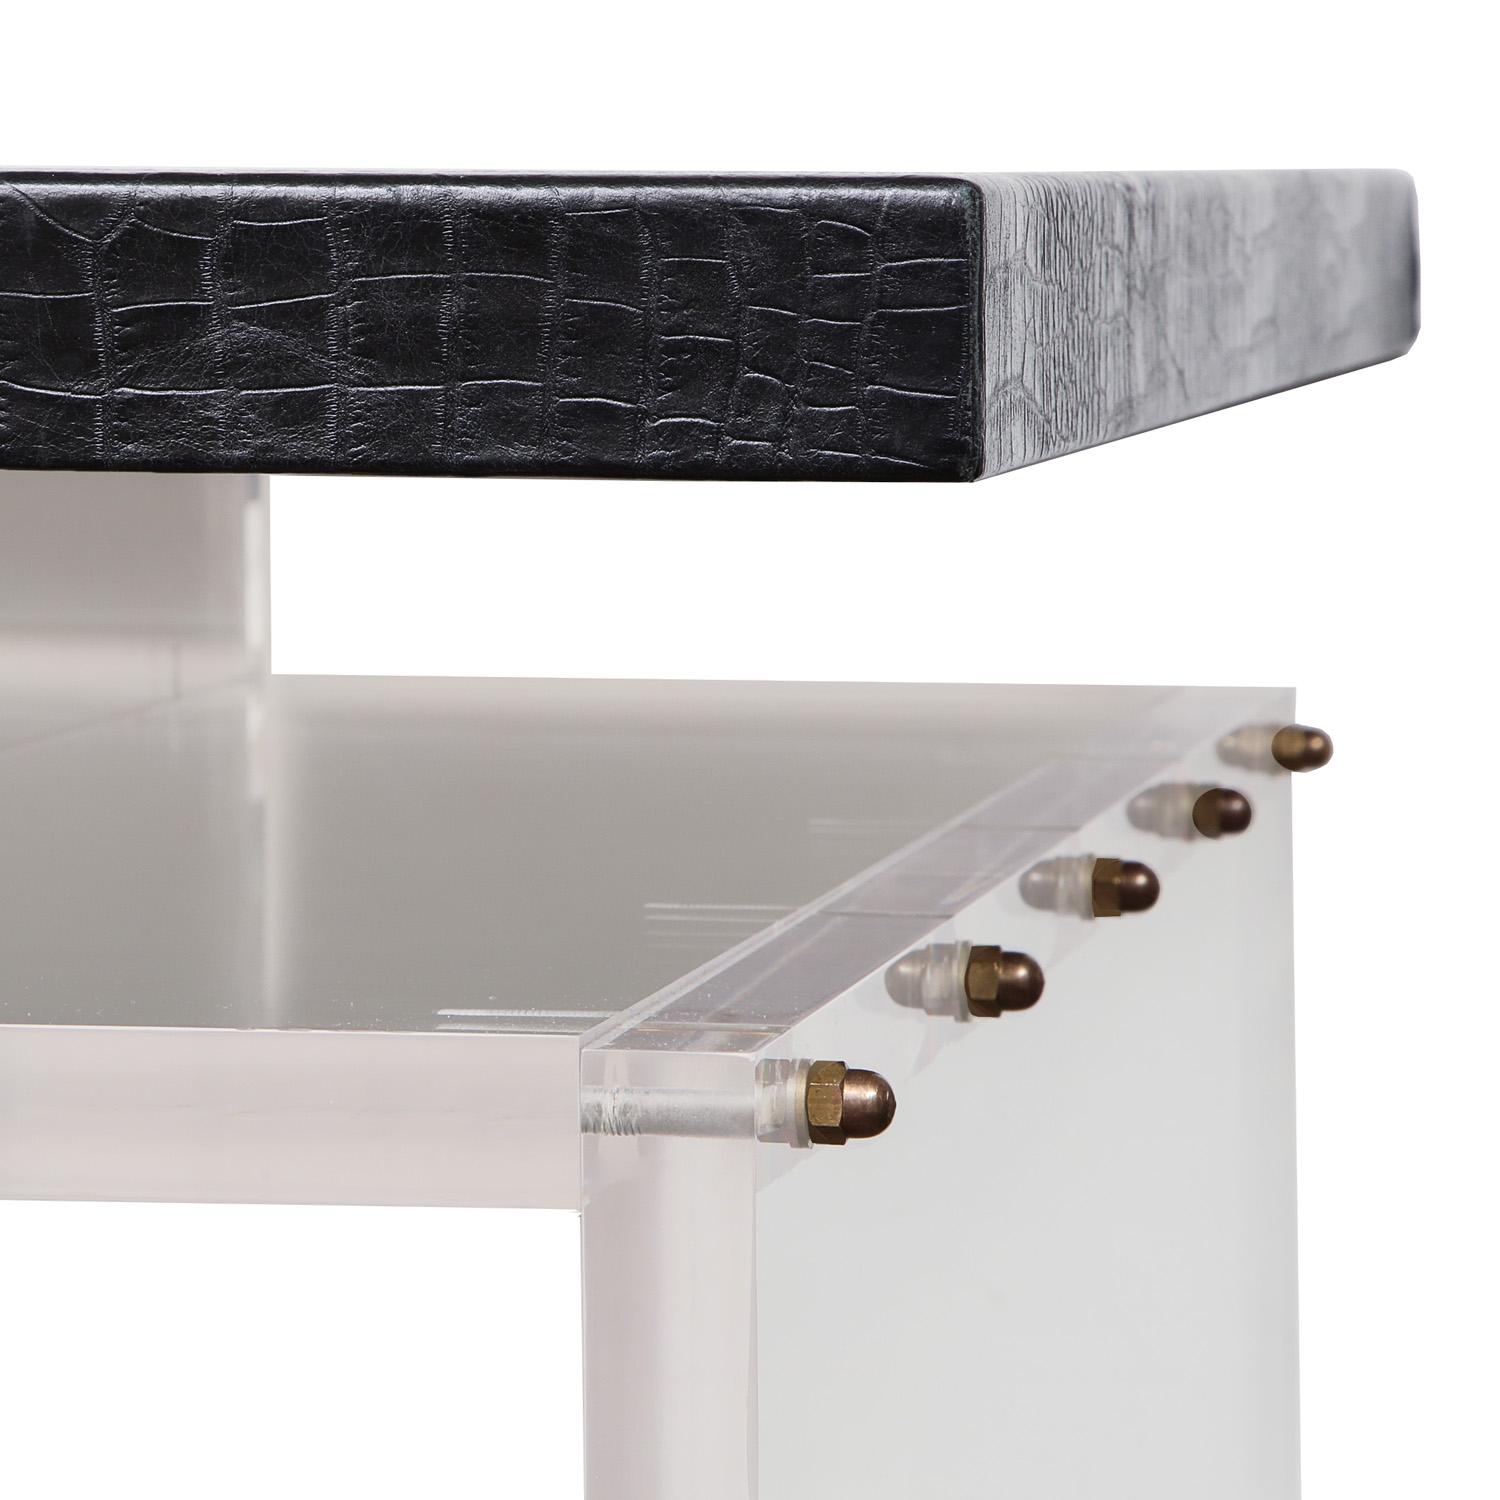 Hand-Crafted Acrylic Partners Desk with Embossed Crocodile Leather Top, Floor Model Sale